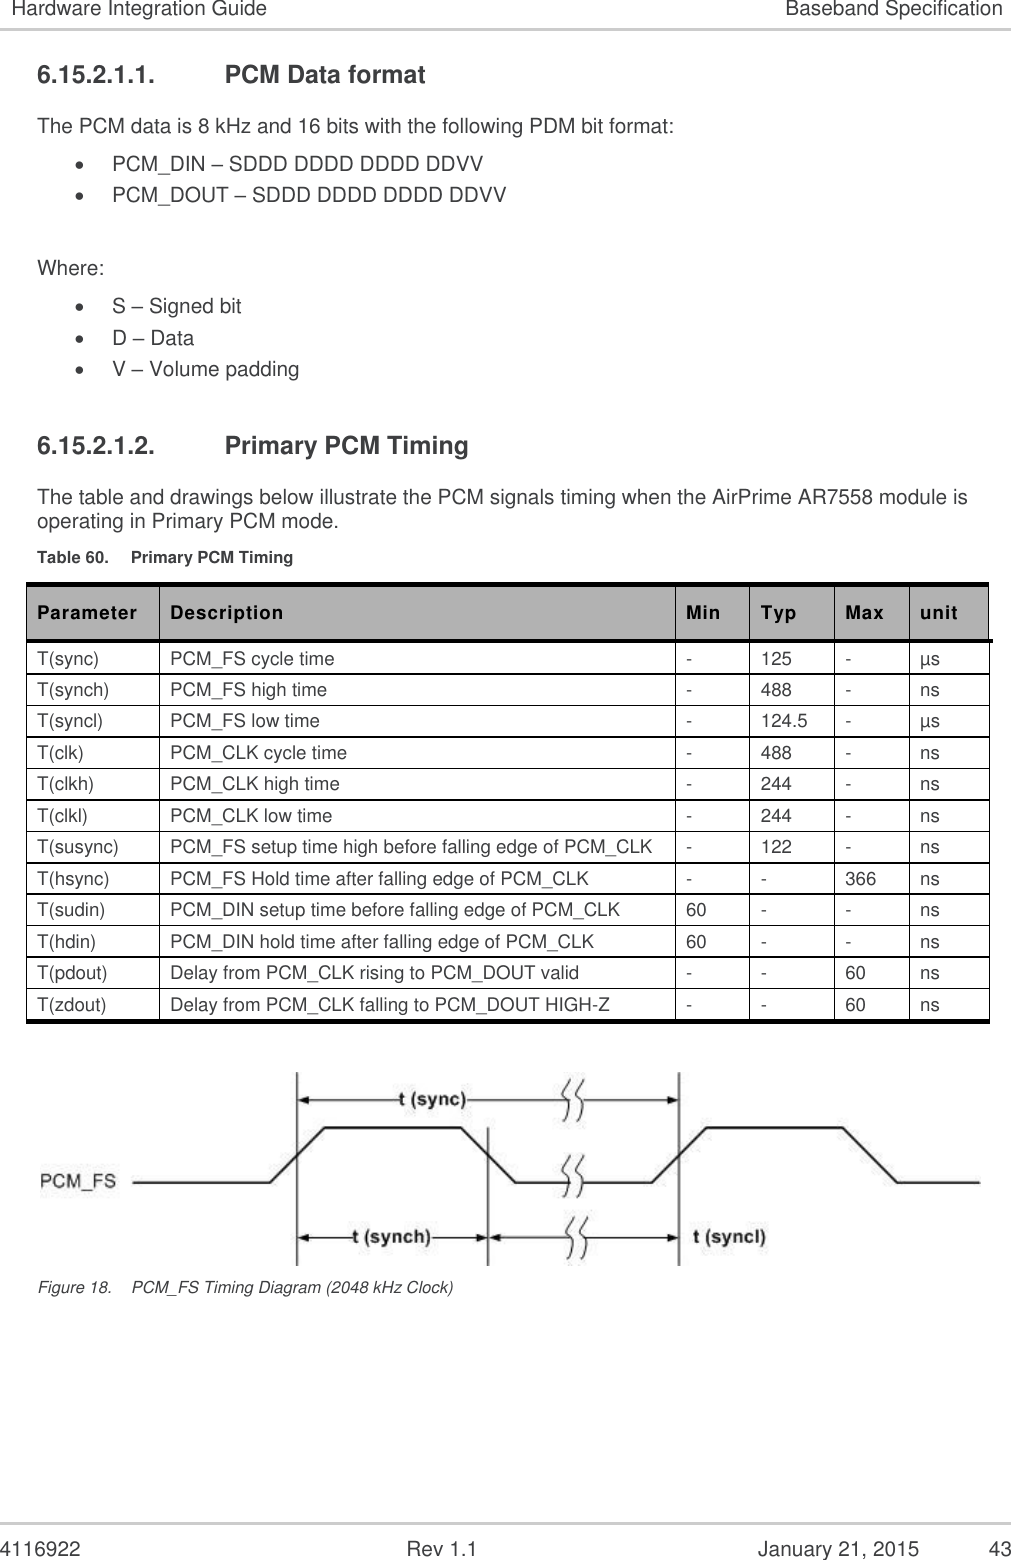   4116922              Rev 1.1          January 21, 2015  43 Hardware Integration Guide Baseband Specification 6.15.2.1.1.  PCM Data format The PCM data is 8 kHz and 16 bits with the following PDM bit format:  PCM_DIN – SDDD DDDD DDDD DDVV  PCM_DOUT – SDDD DDDD DDDD DDVV  Where:  S – Signed bit  D – Data  V – Volume padding 6.15.2.1.2.  Primary PCM Timing The table and drawings below illustrate the PCM signals timing when the AirPrime AR7558 module is operating in Primary PCM mode. Table 60.  Primary PCM Timing Parameter Description Min Typ Max unit T(sync) PCM_FS cycle time - 125 - µs  T(synch) PCM_FS high time - 488 - ns T(syncl) PCM_FS low time - 124.5 - µs  T(clk) PCM_CLK cycle time - 488 - ns T(clkh) PCM_CLK high time - 244 - ns T(clkl) PCM_CLK low time - 244 - ns T(susync)  PCM_FS setup time high before falling edge of PCM_CLK - 122 - ns T(hsync) PCM_FS Hold time after falling edge of PCM_CLK - - 366 ns T(sudin) PCM_DIN setup time before falling edge of PCM_CLK 60 - - ns T(hdin) PCM_DIN hold time after falling edge of PCM_CLK 60 - - ns T(pdout) Delay from PCM_CLK rising to PCM_DOUT valid - - 60 ns T(zdout) Delay from PCM_CLK falling to PCM_DOUT HIGH-Z - - 60 ns   Figure 18.  PCM_FS Timing Diagram (2048 kHz Clock) 